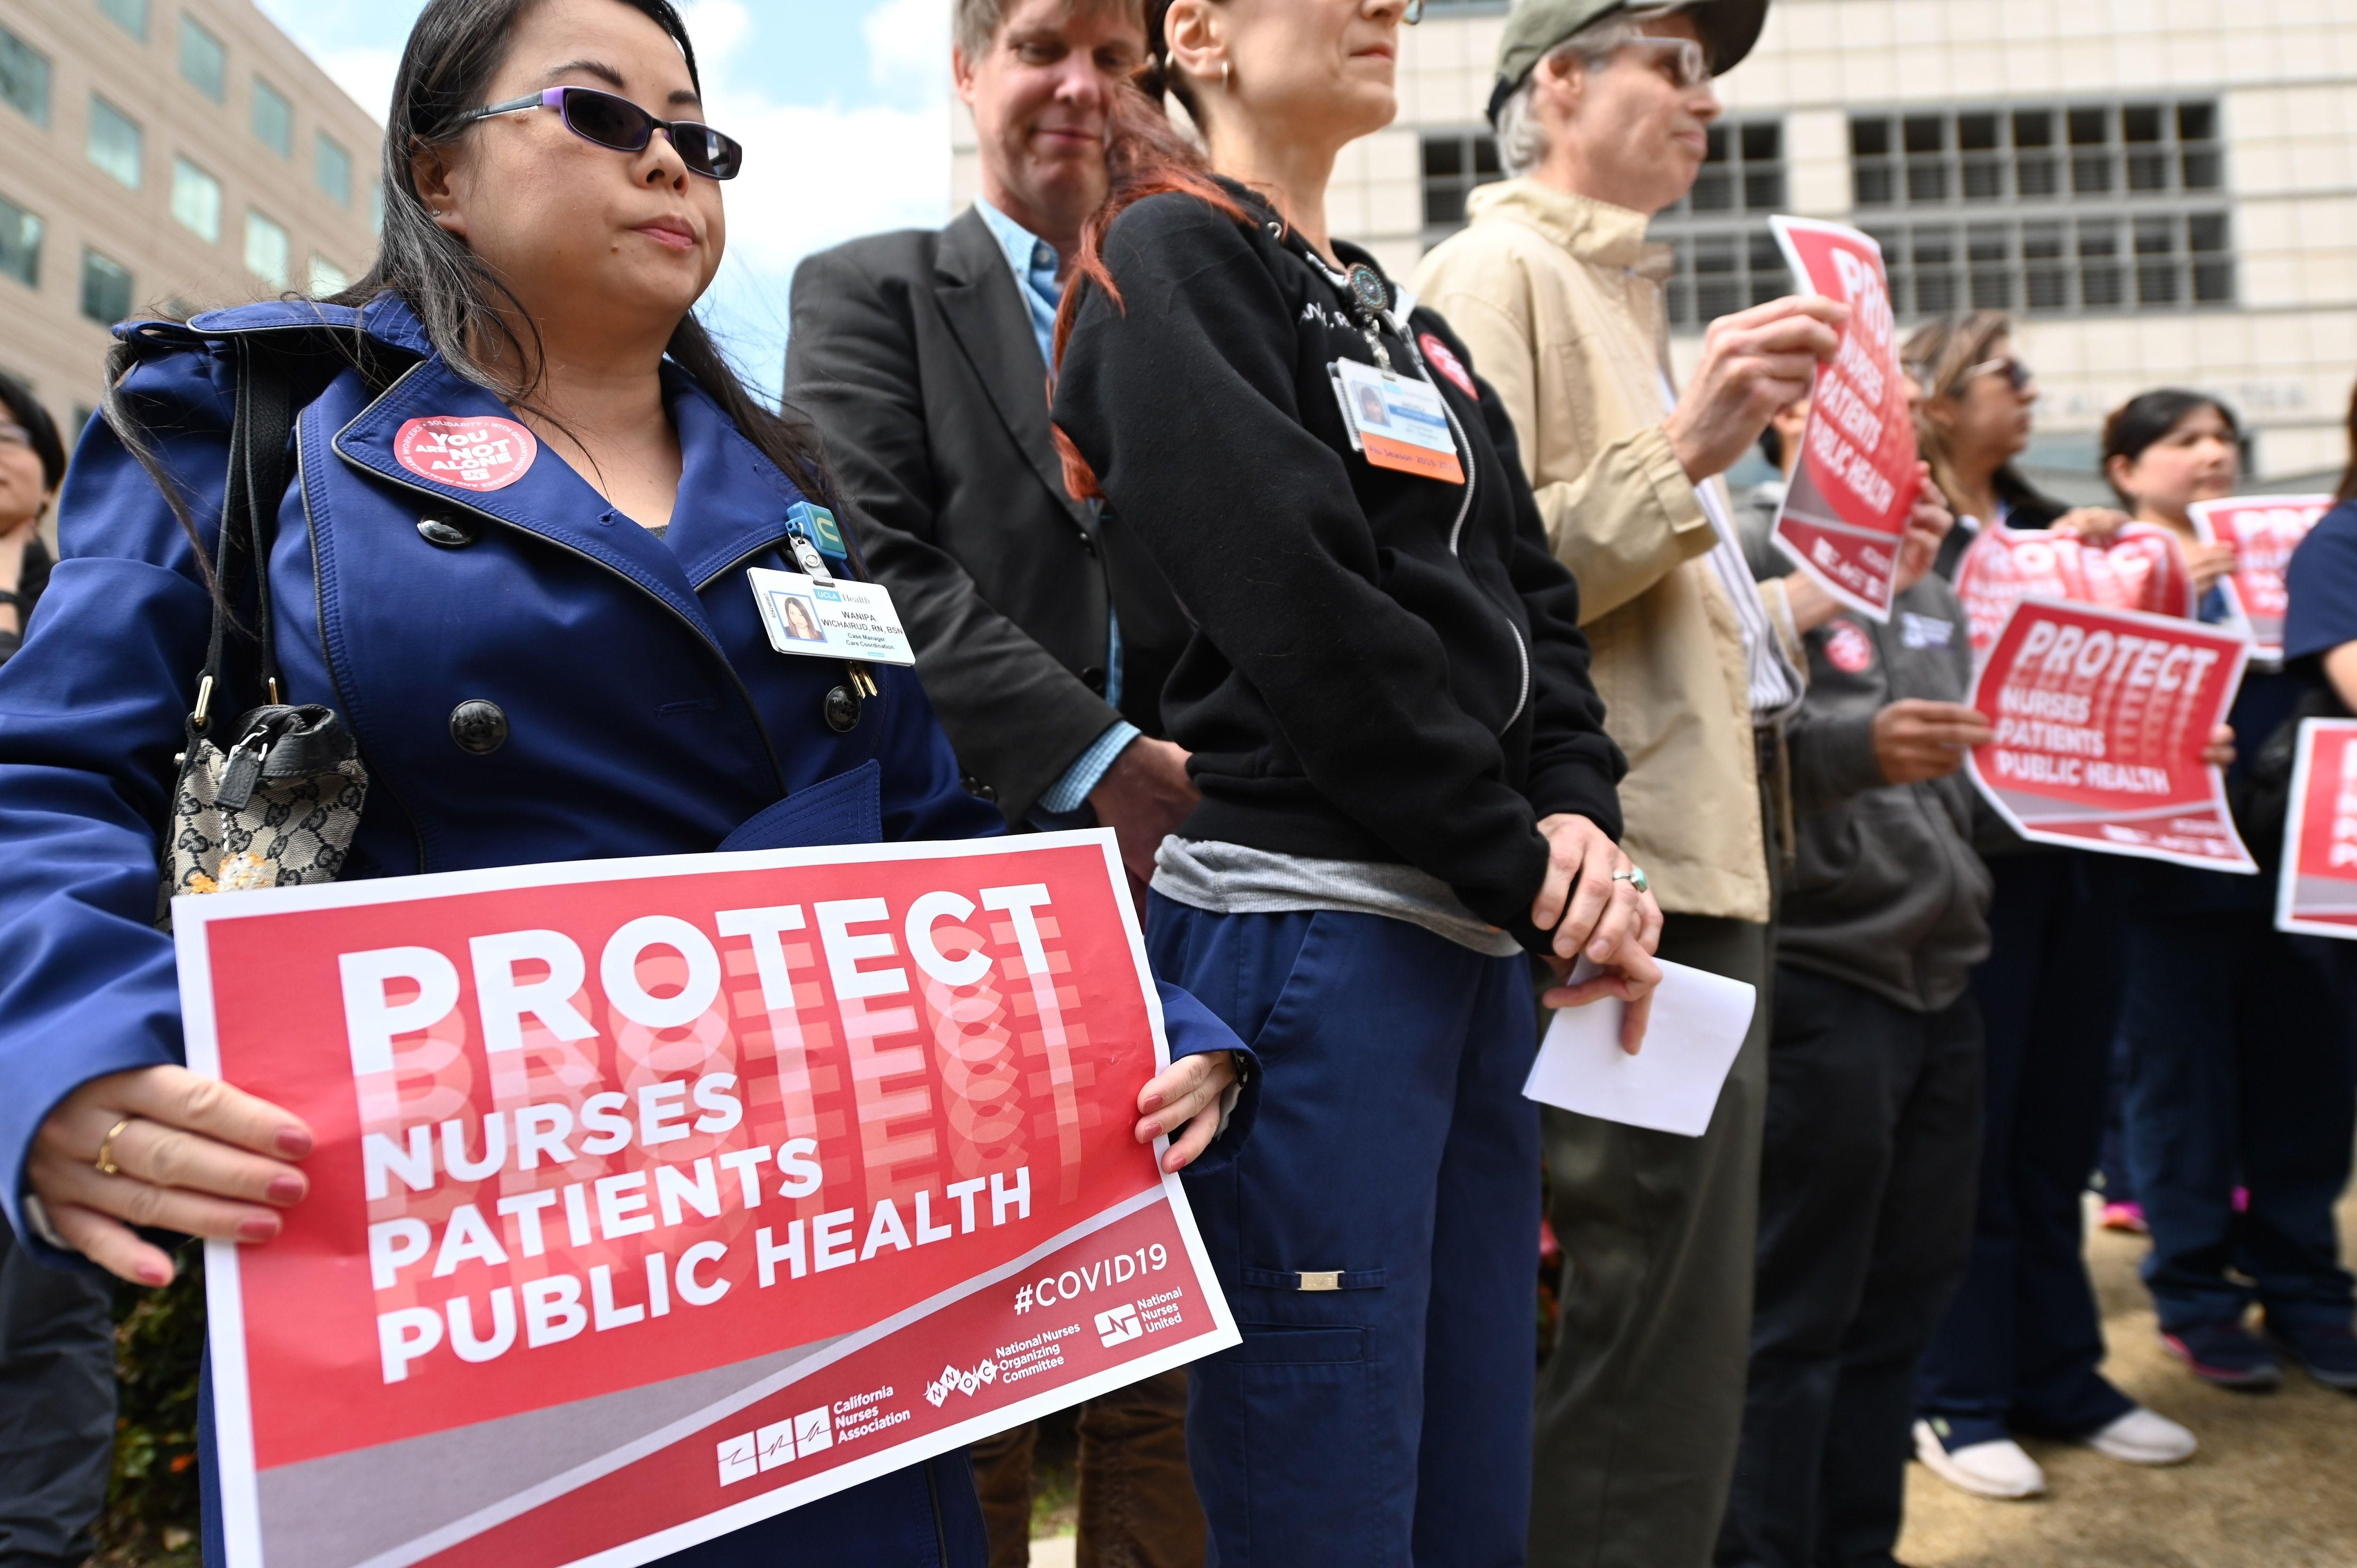 Nurses protest to oppose what they call the Center for Disease Control's (CDC) weak response to the novel coronavirus, COVID-19 pandemic, March 11, 2020 outside the UCLA Medical Center in Los Angeles, California. (Photo by ROBYN BECK/AFP via Getty Images)